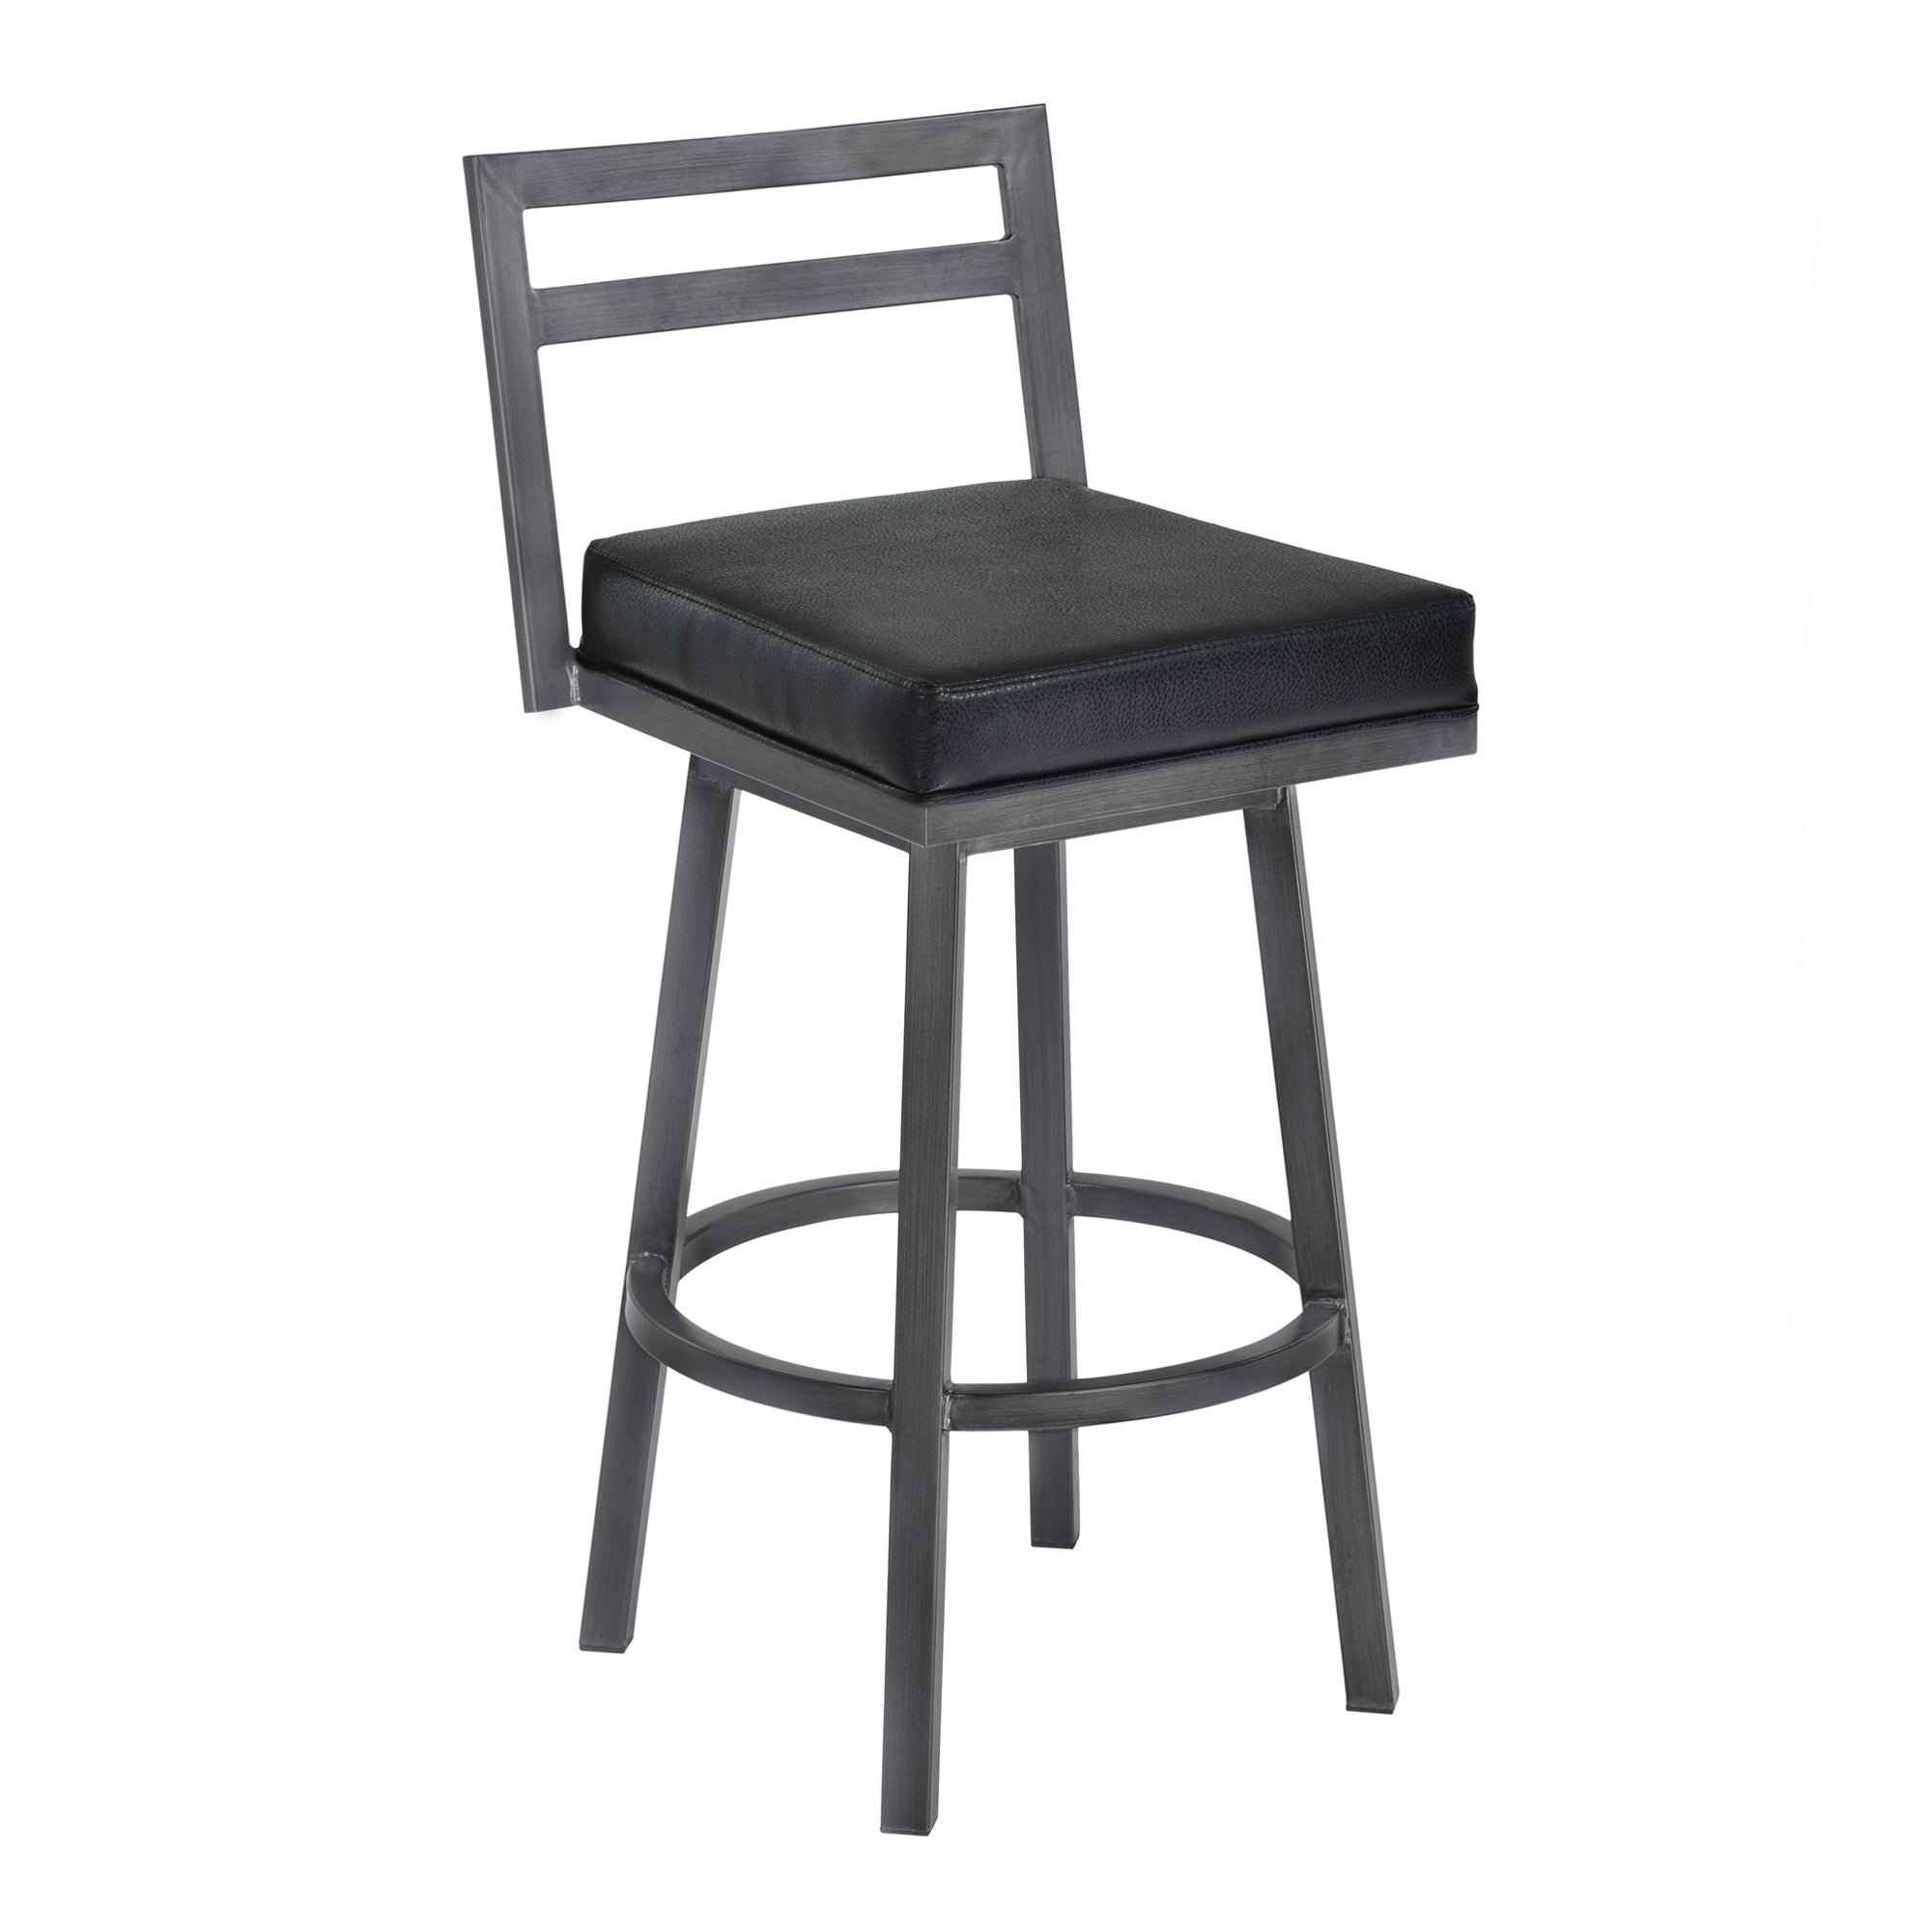 Armen Living LCMOBAMFBL26 Moniq 26 Counter Height Metal Swivel Barstool in Ford Black Faux Leather and Mineral Finish